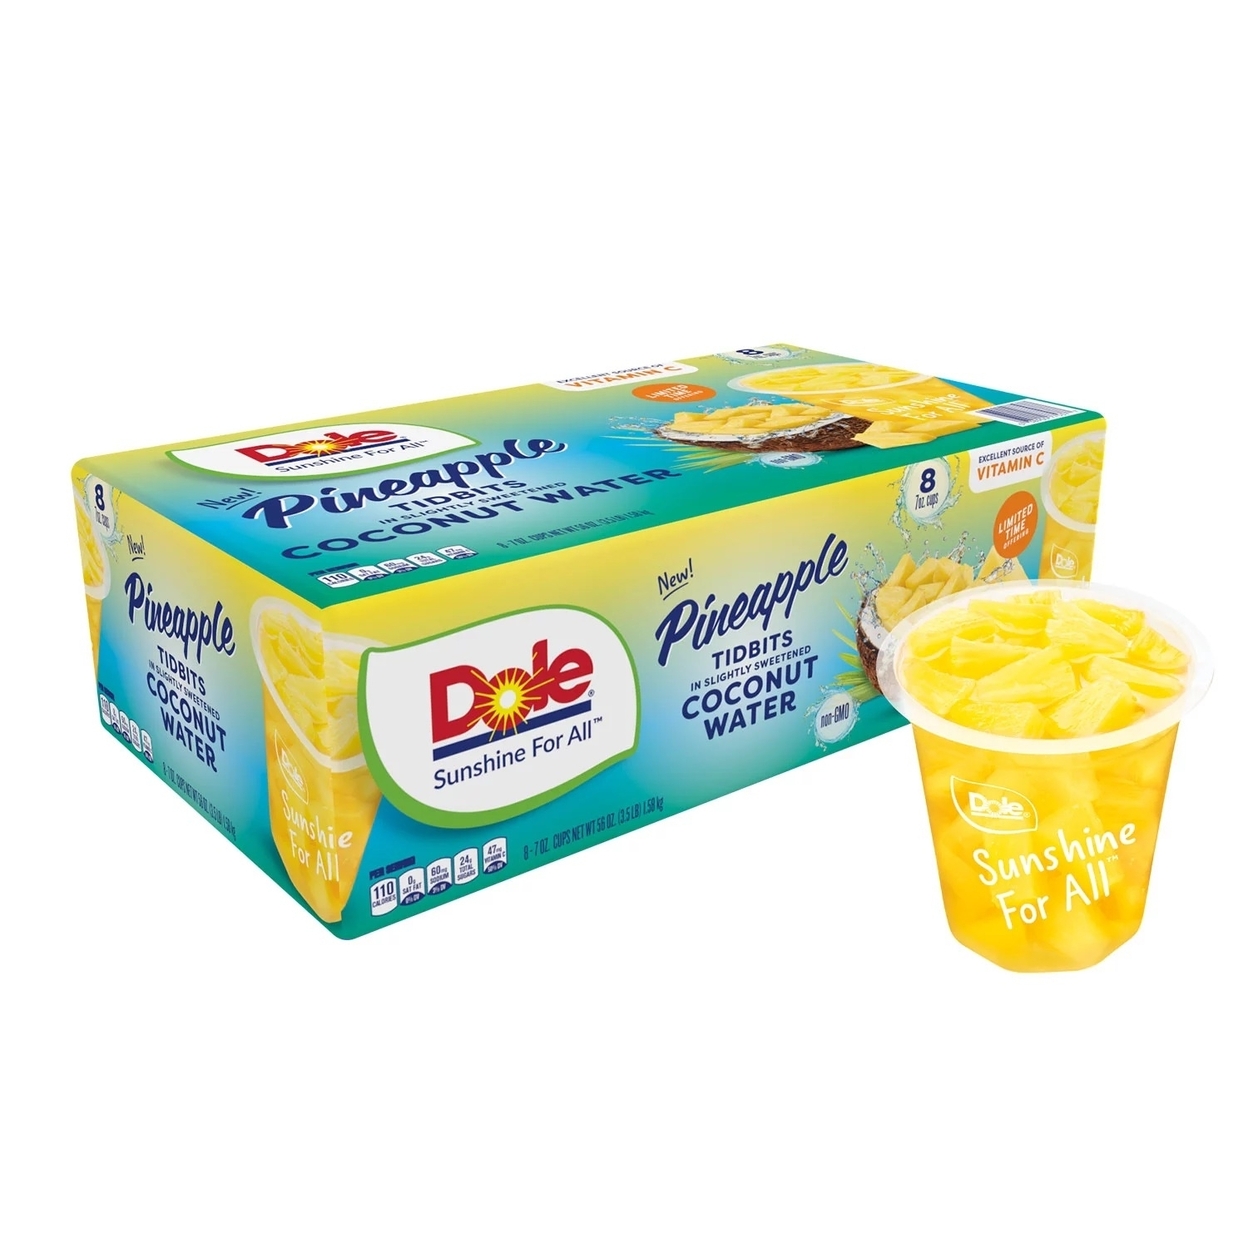 Dole Pineapple Tidbits In Slightly Sweetened Coconut Water, 7 Ounce (Pack Of 8)